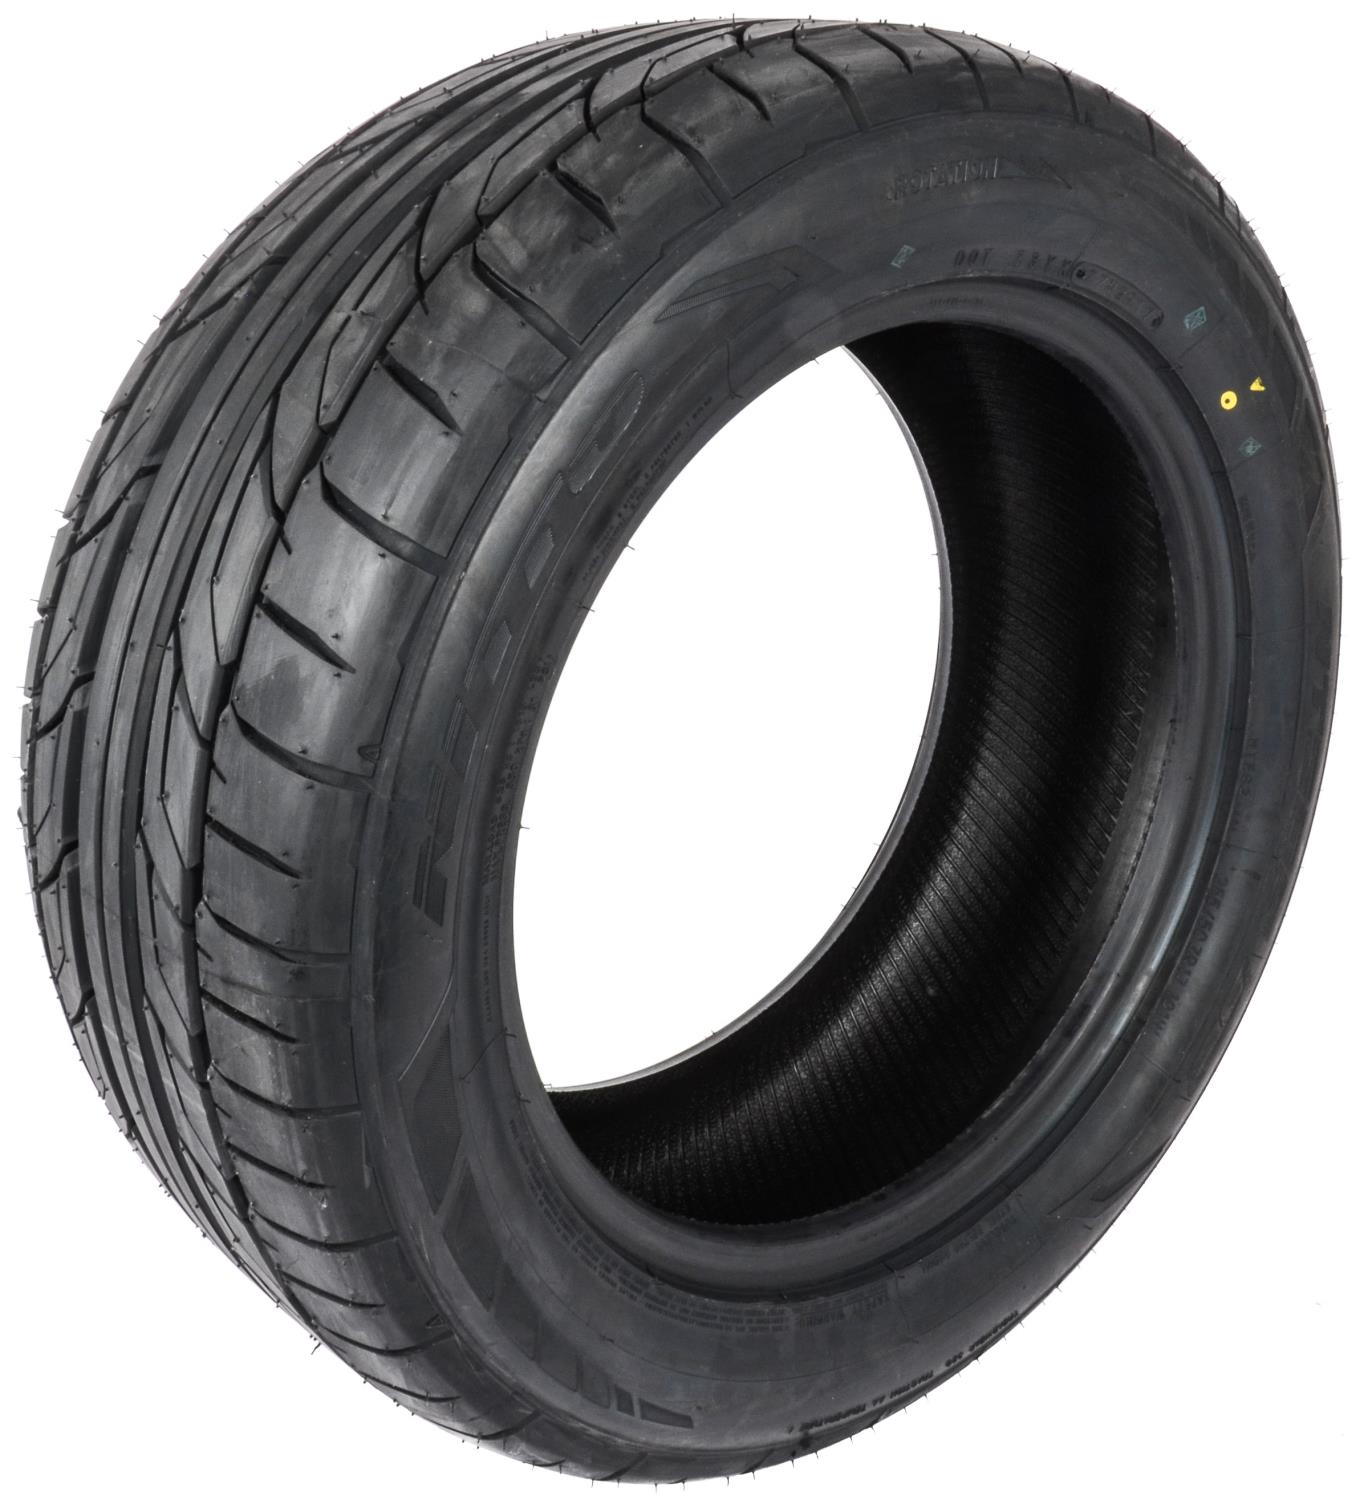 211230 NT555 G2 Summer UHP Radial Tire 255/50R17